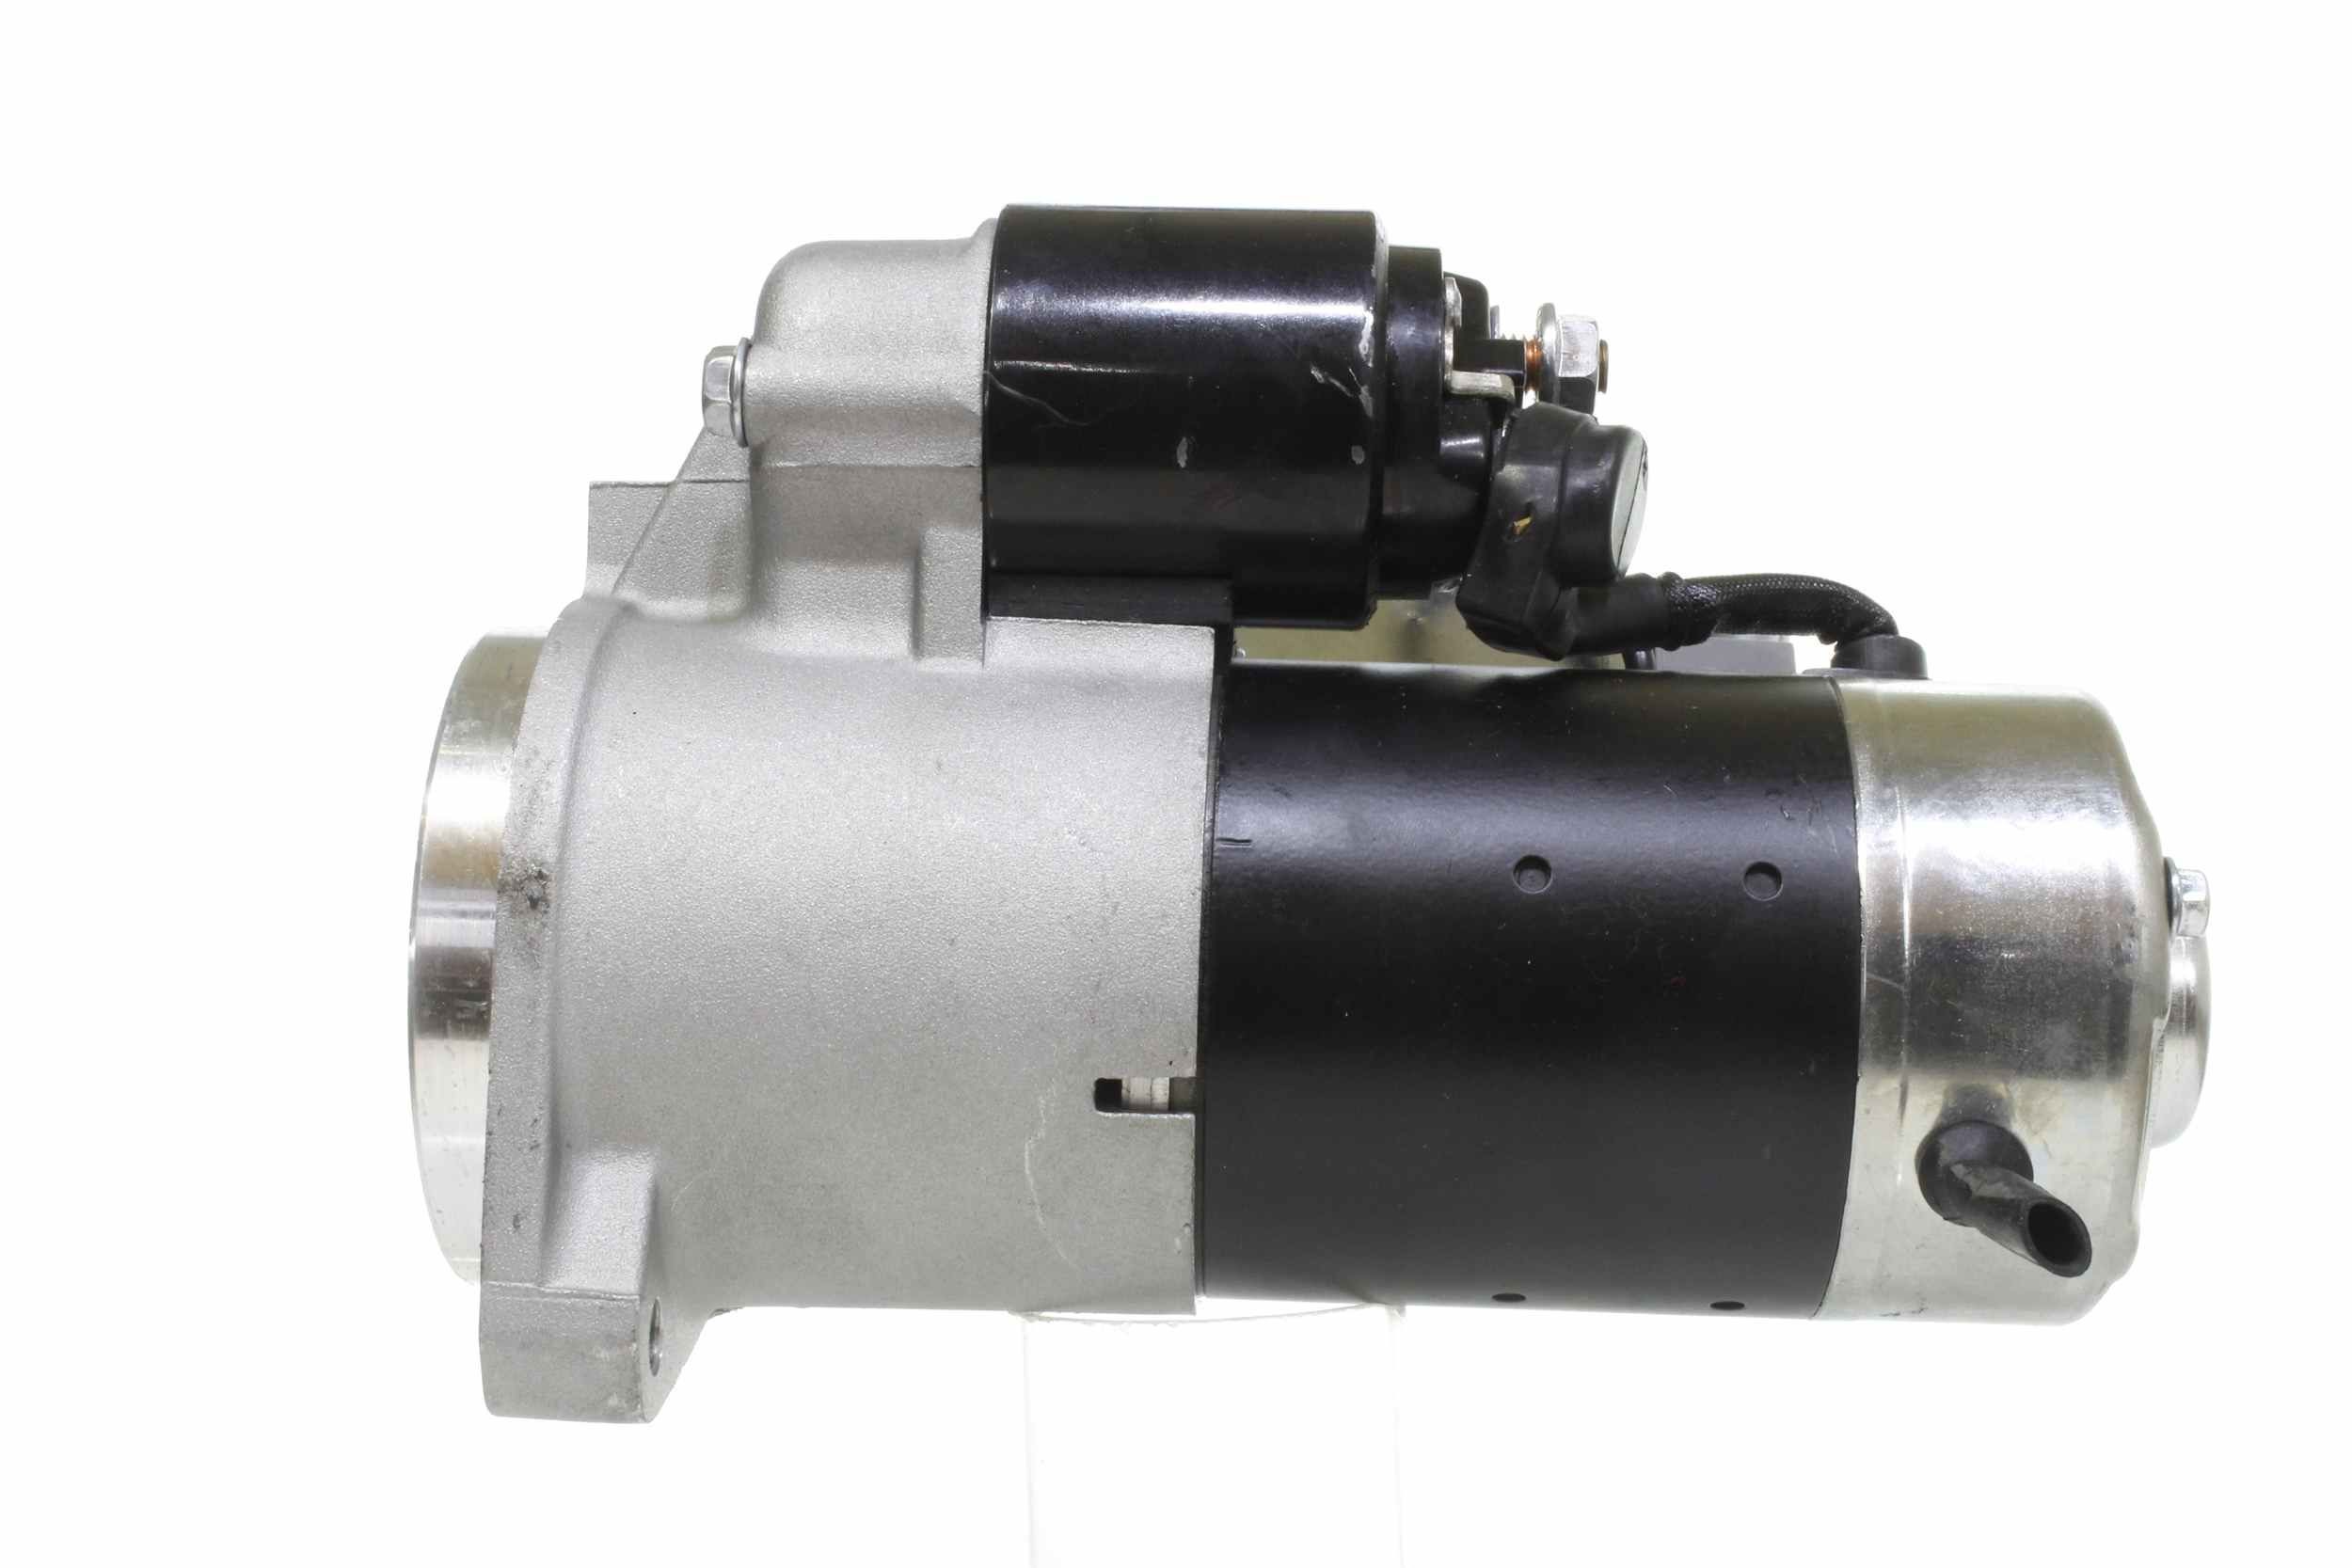 10440640 Engine starter motor ALANKO 104226 review and test